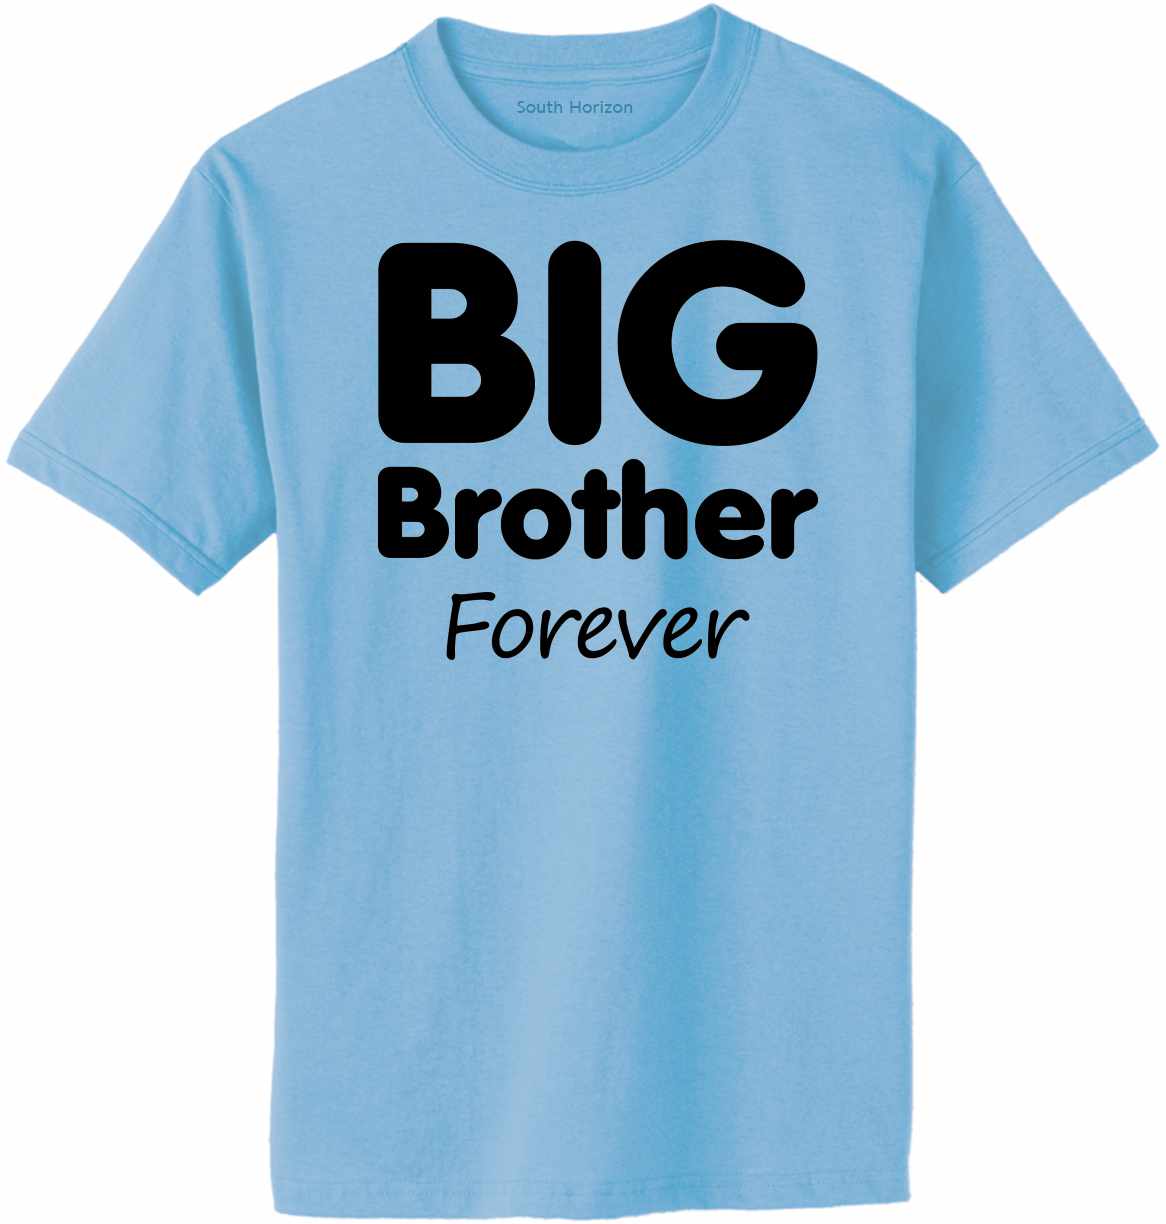 Big Brother Forever Adult T-Shirt (#952-1)